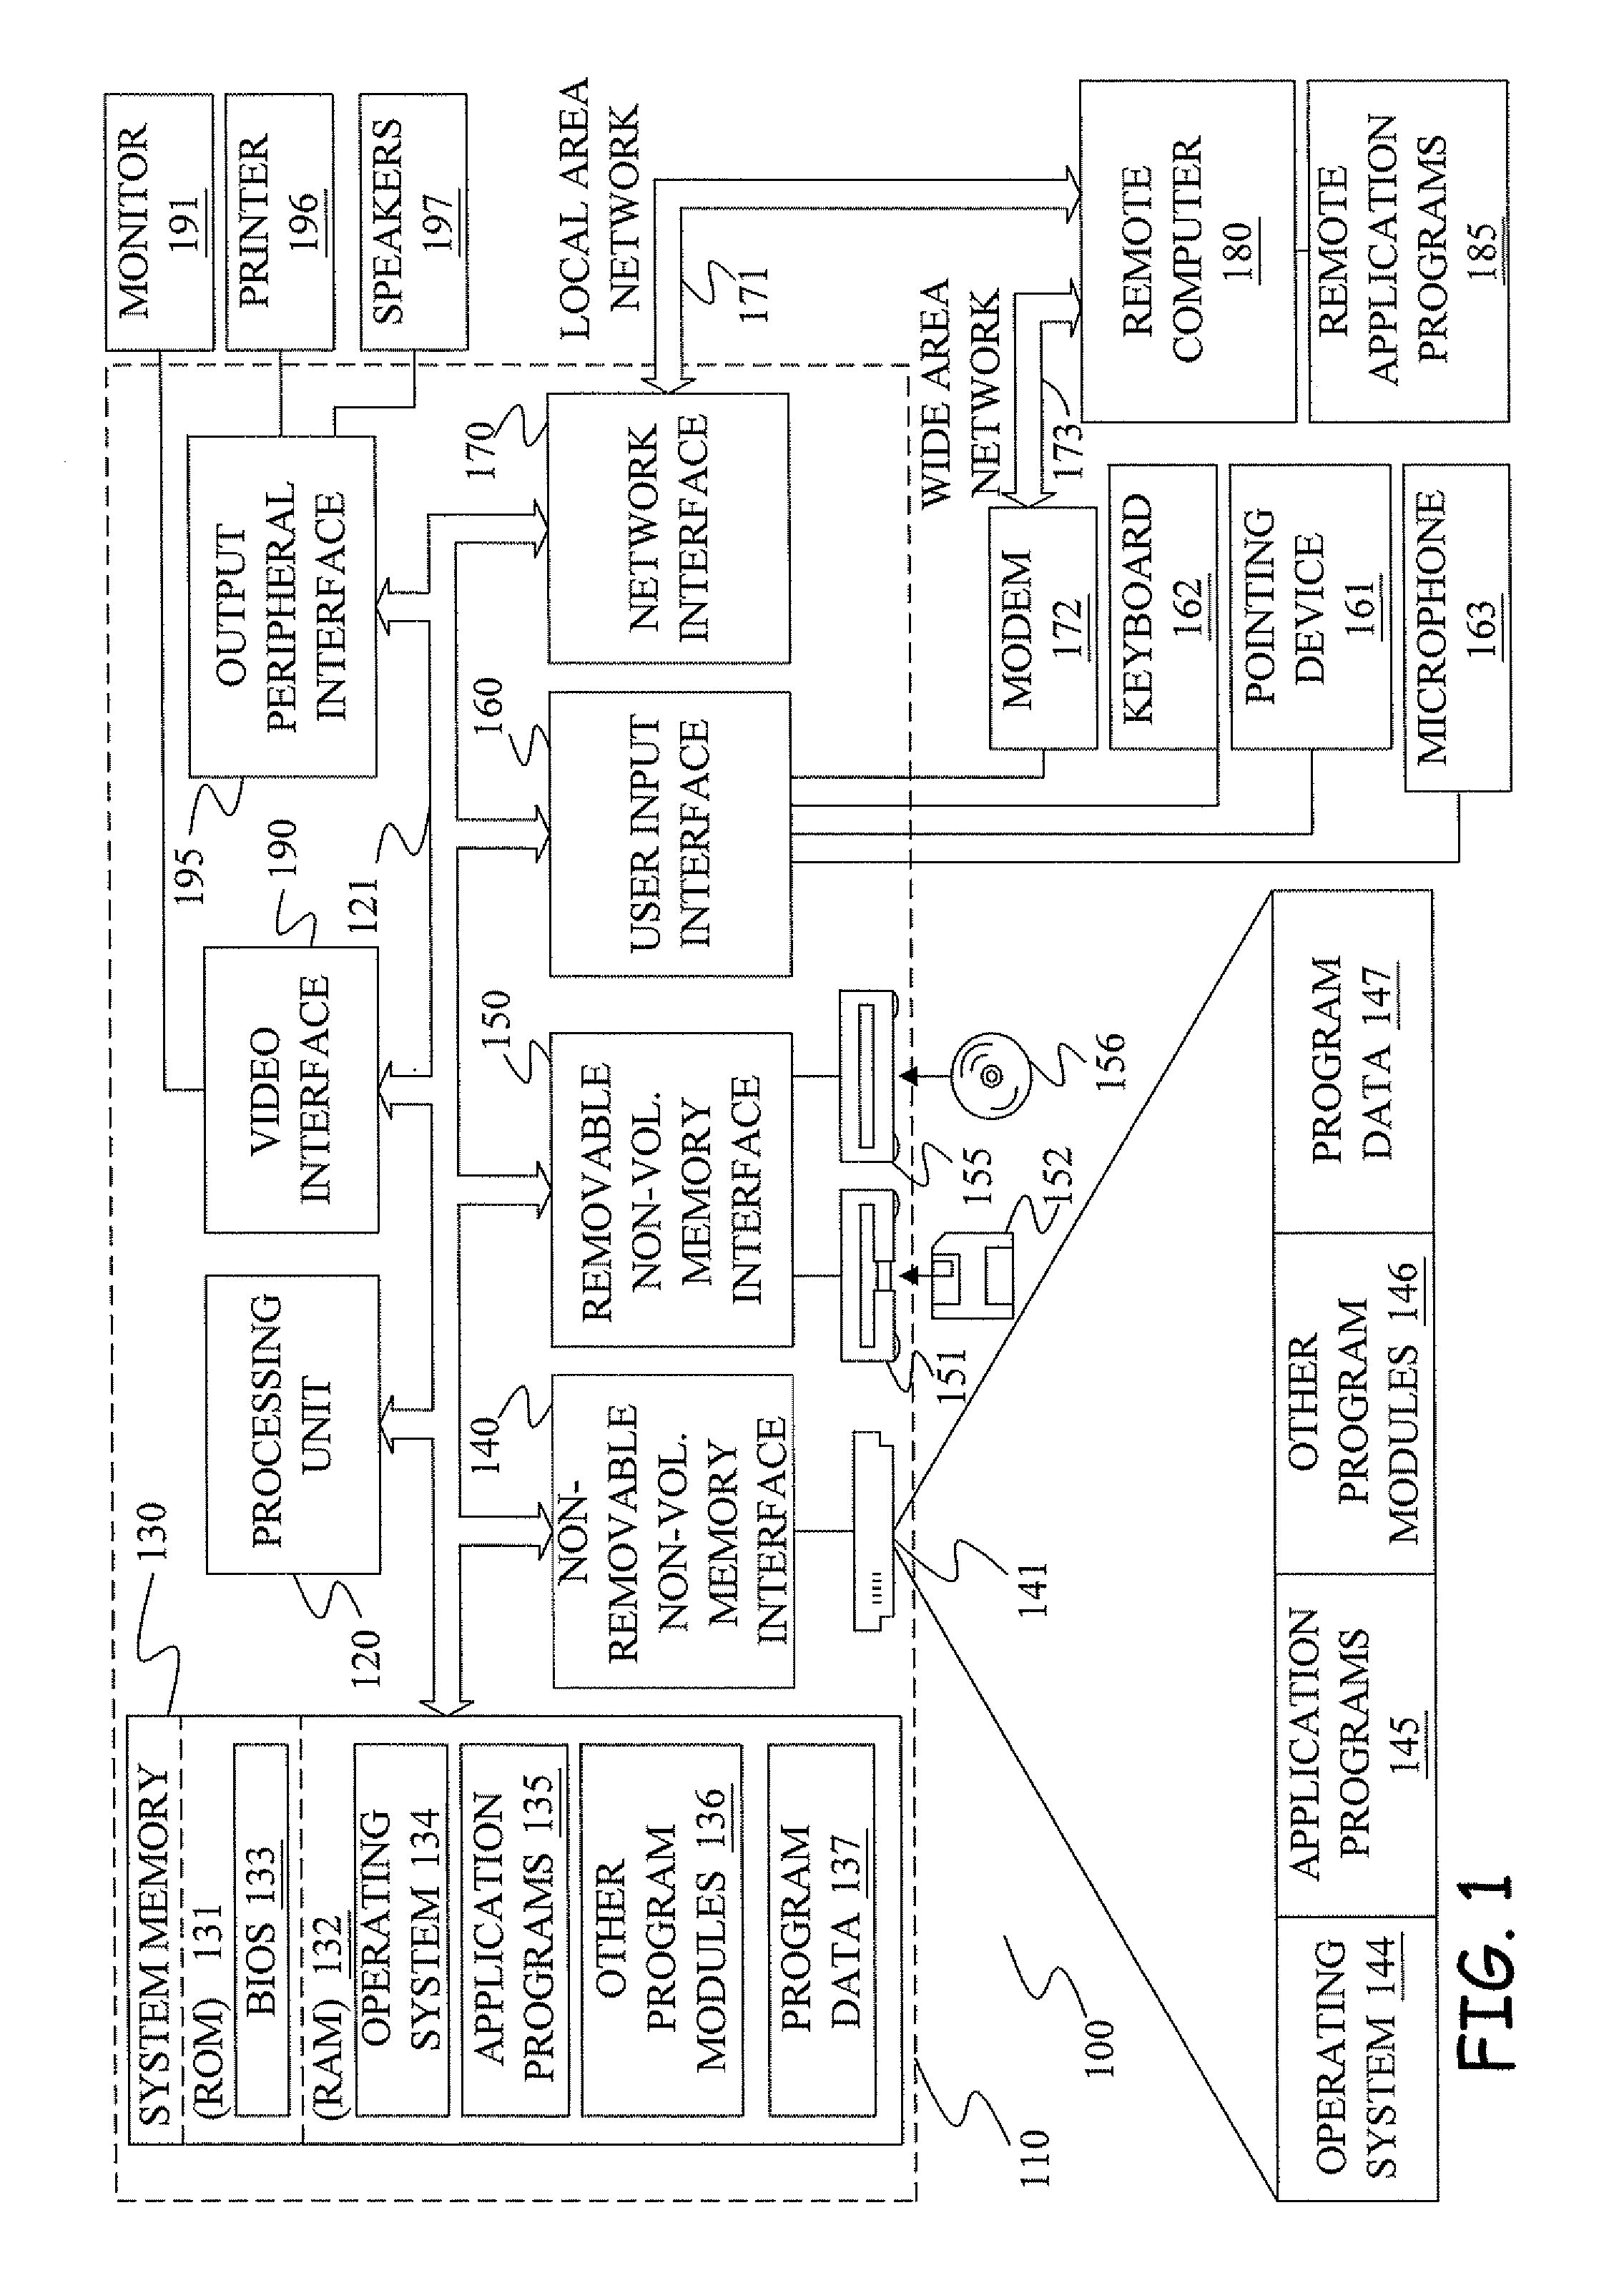 Computer aided query to task mapping